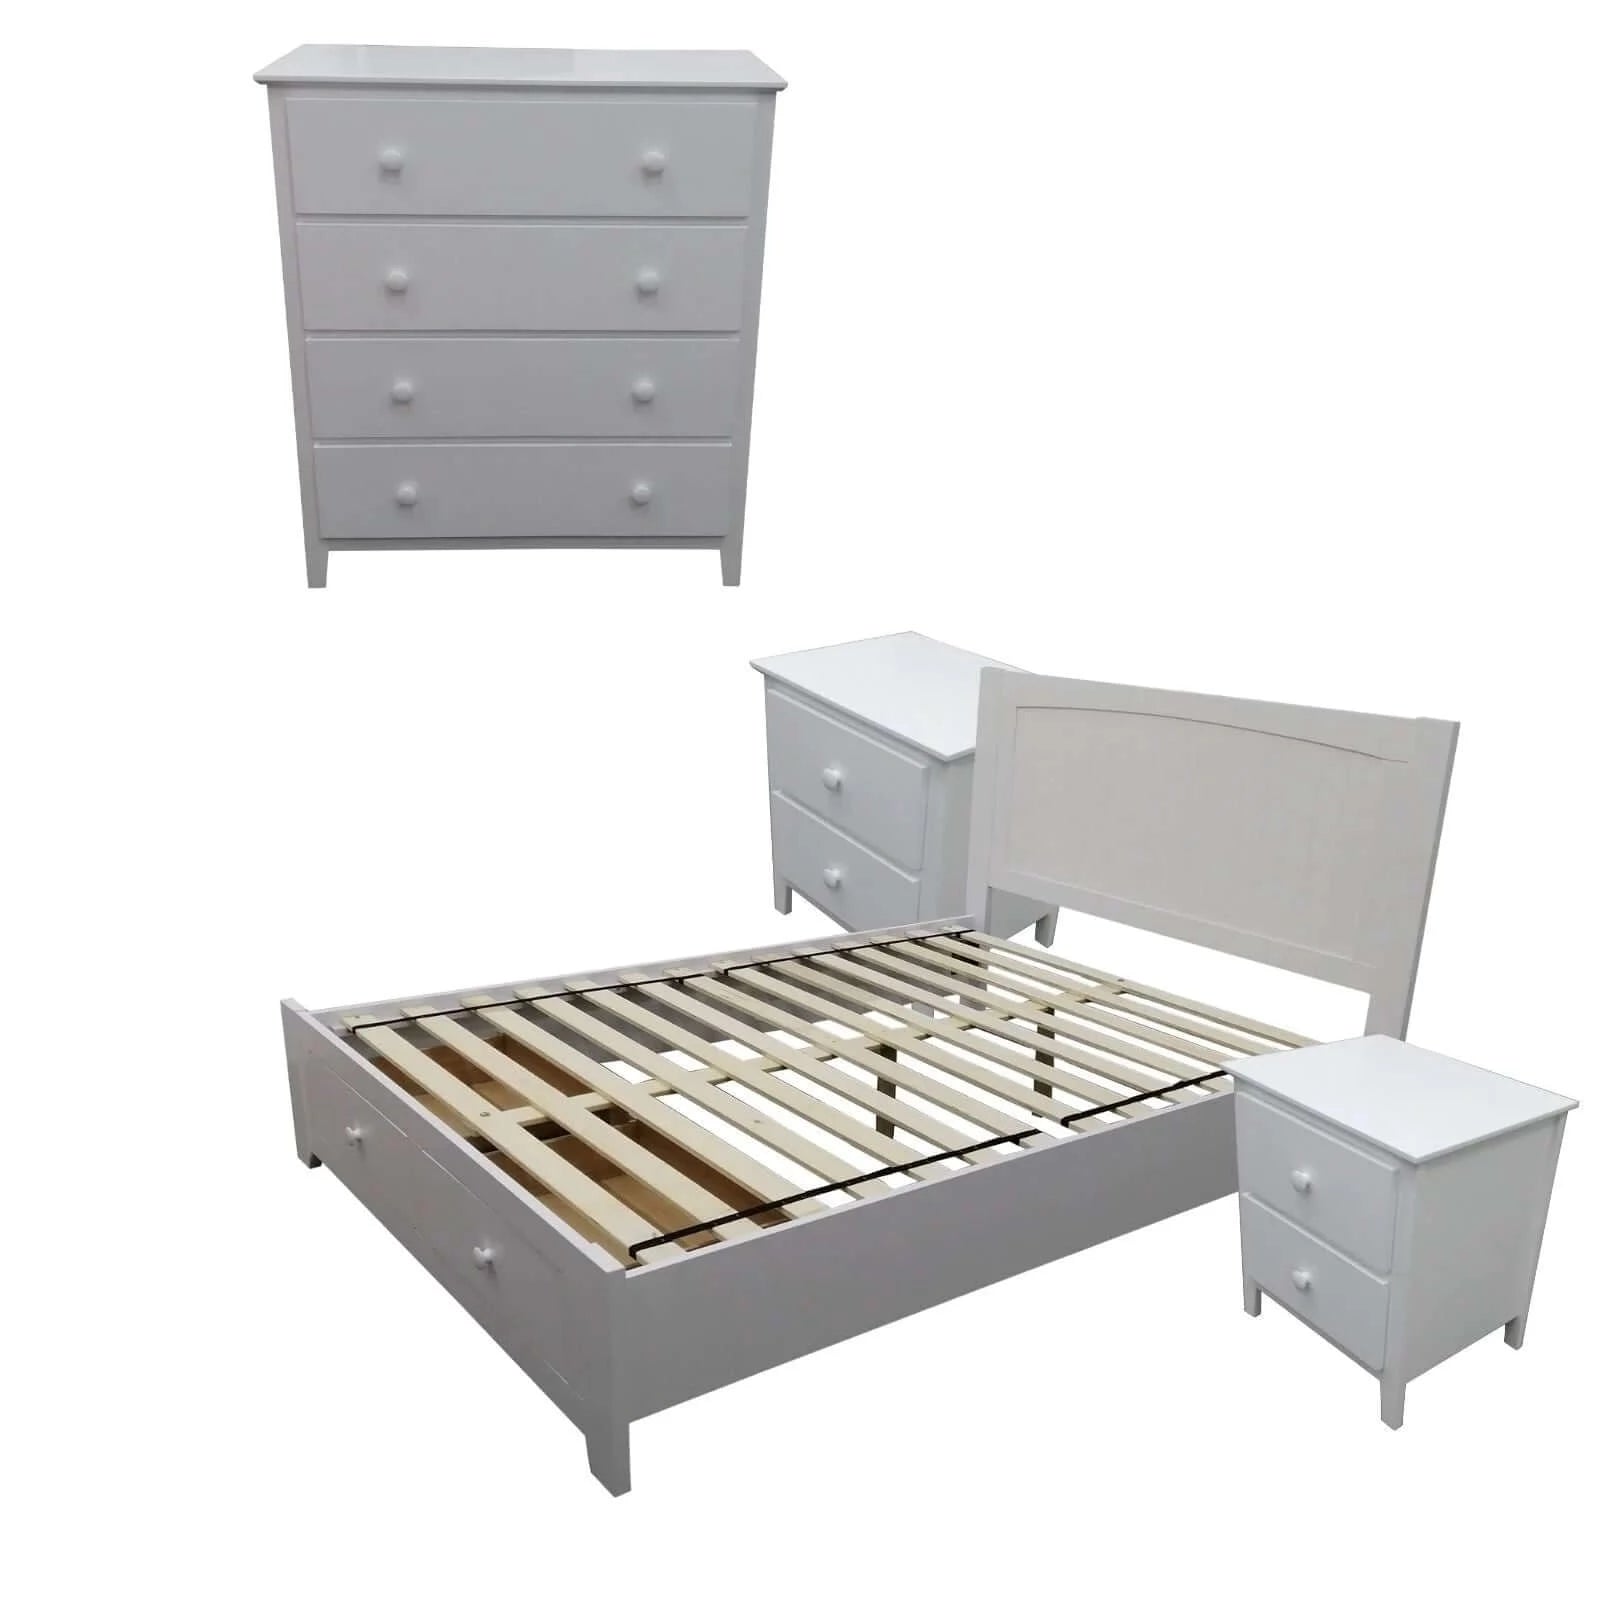 Buy wisteria 4pc double bed suite bedside tallboy bedroom set furniture package -wht - upinteriors-Upinteriors